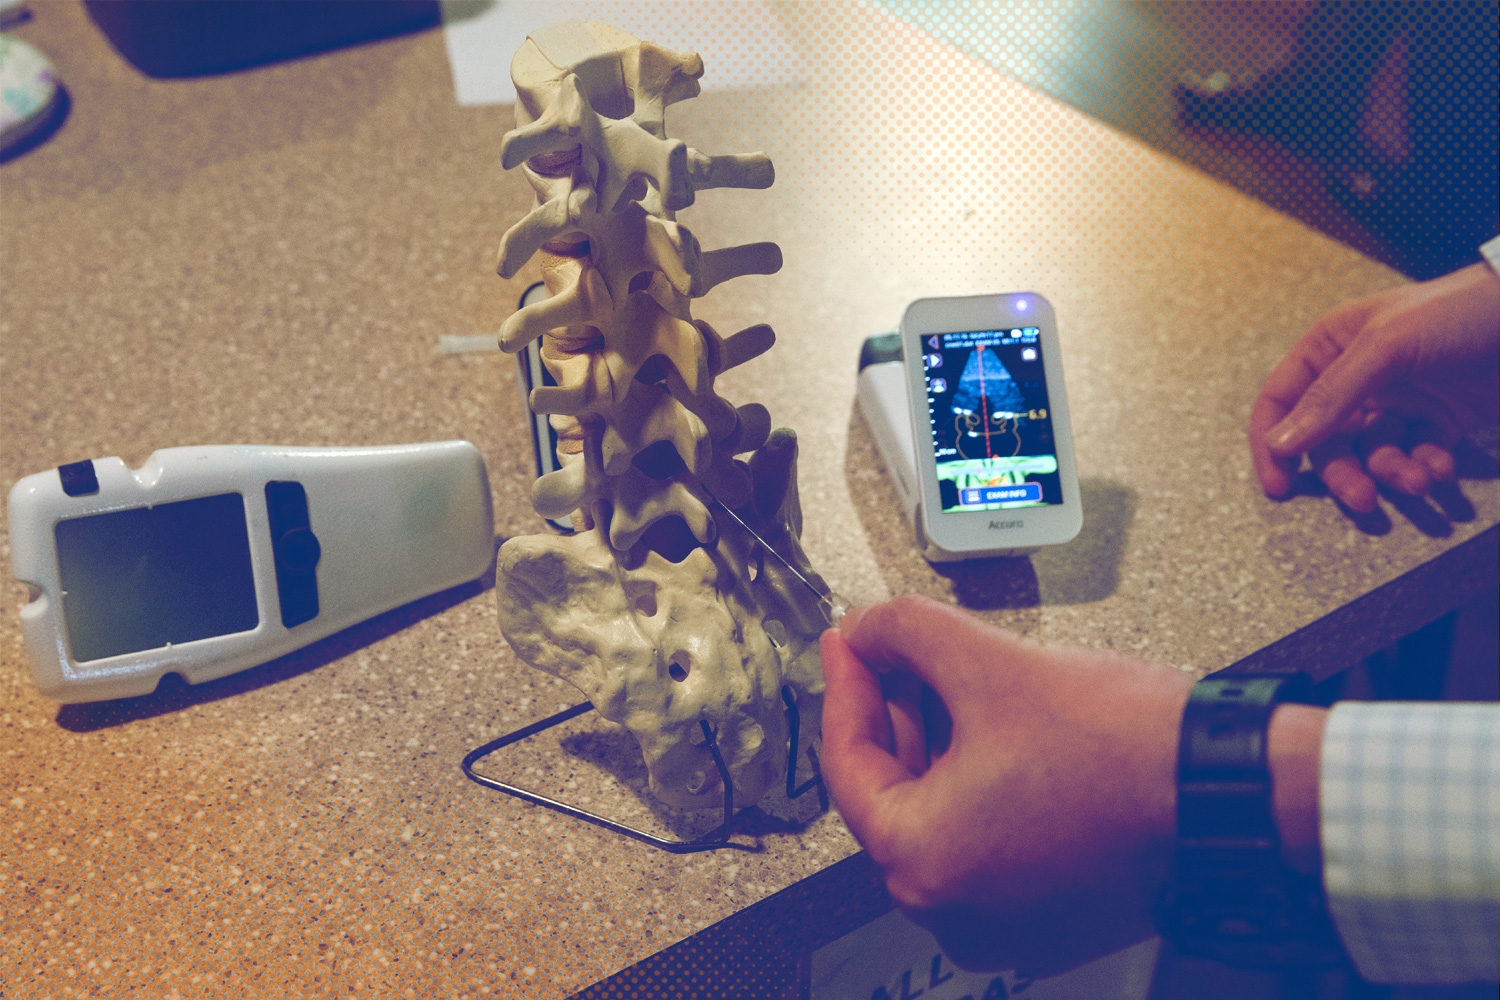 Accuro device being used on a clinical spine to show how it works